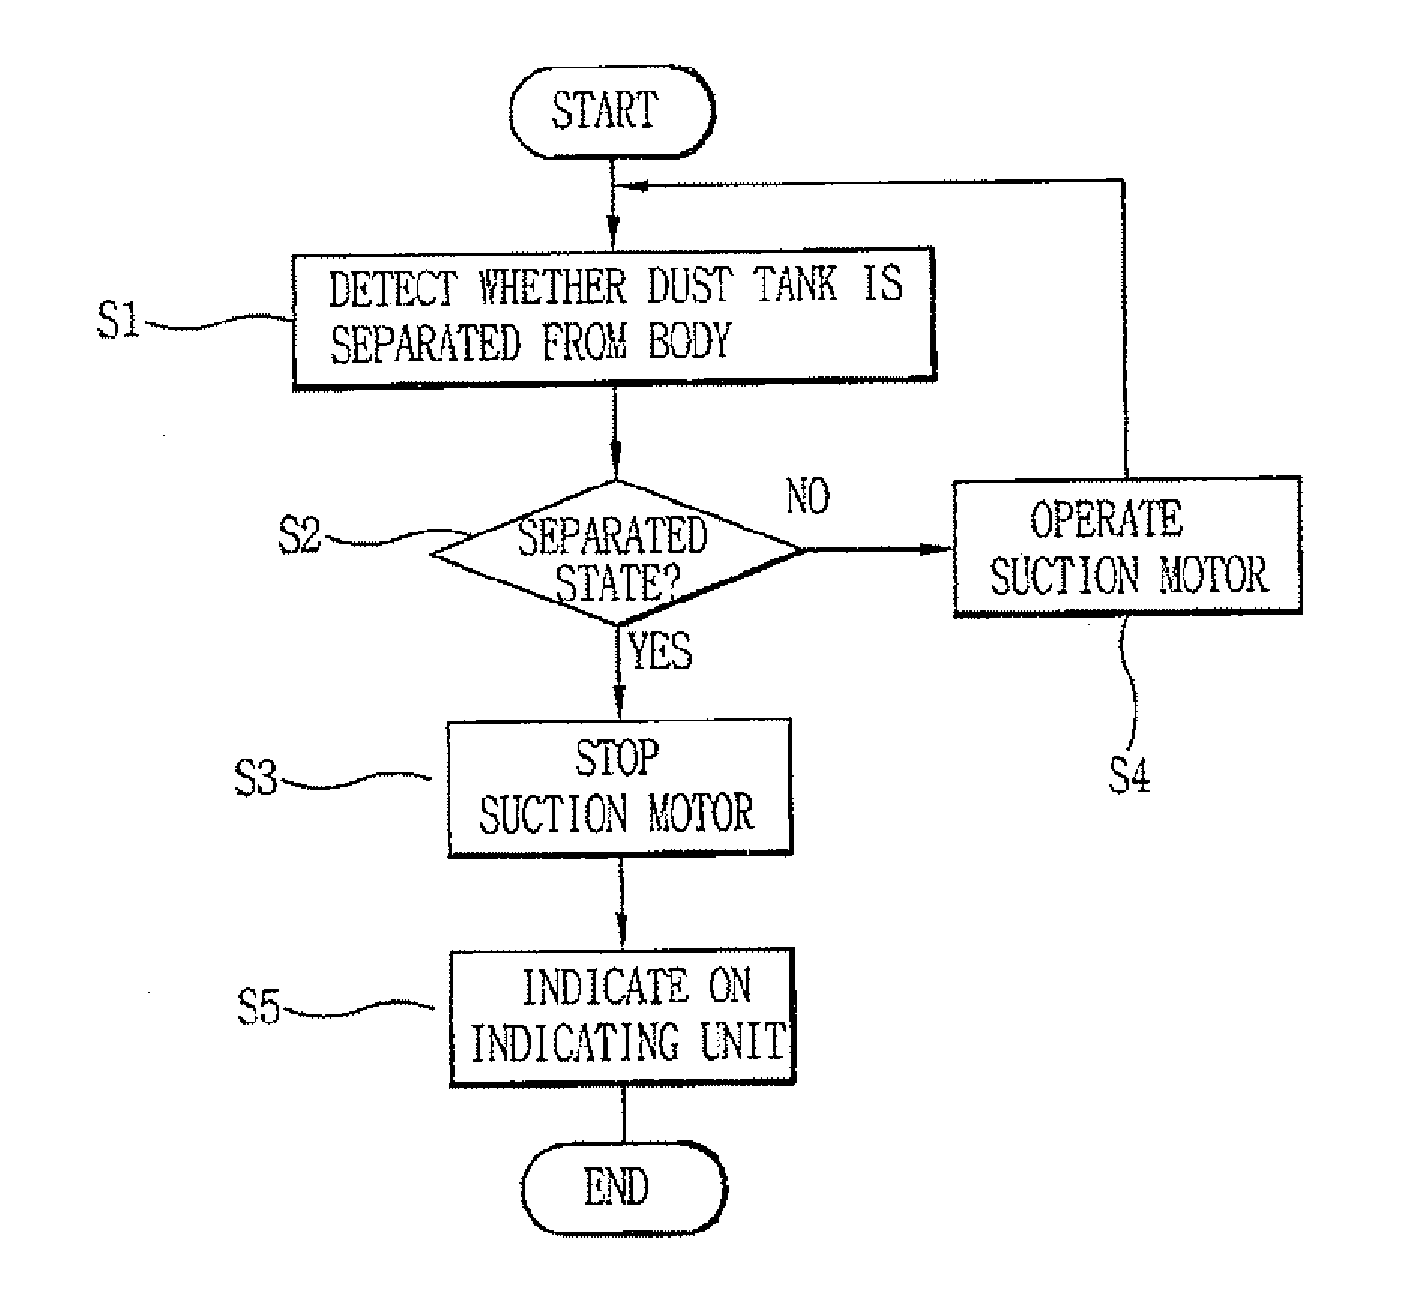 Robot cleaner having function for detecting separation of dust tank and control method thereof